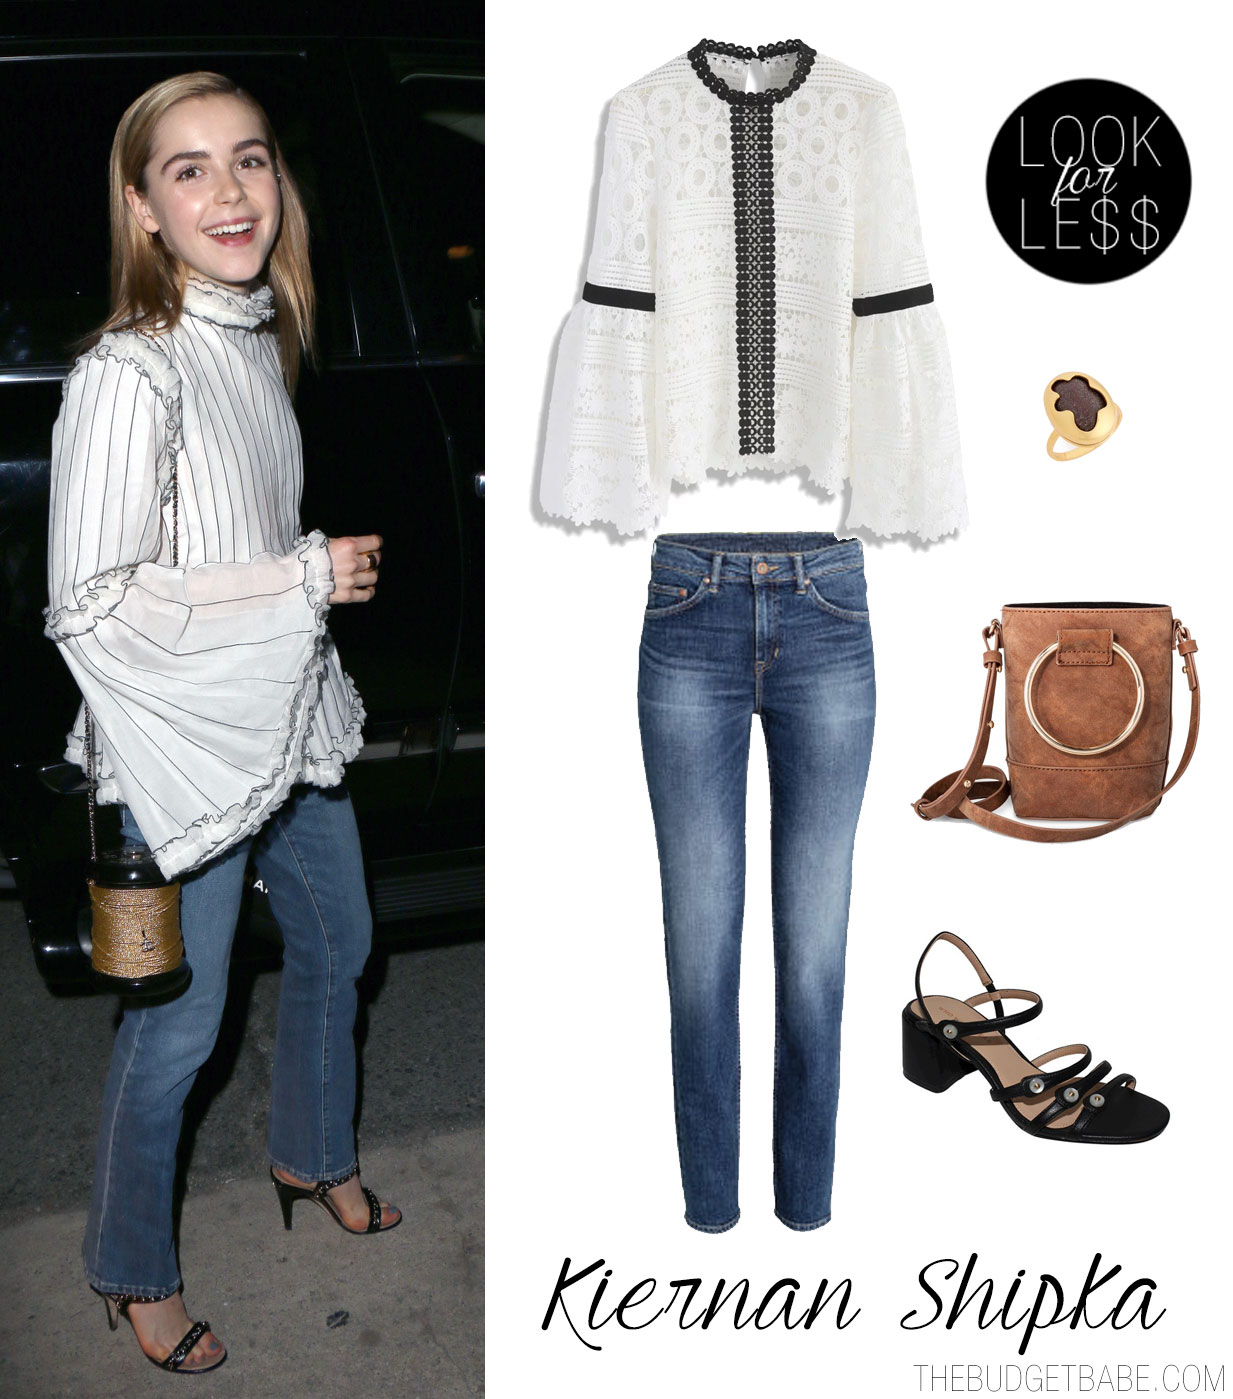 Kiernan Shipka's bell sleeve blouse and jeans look for less